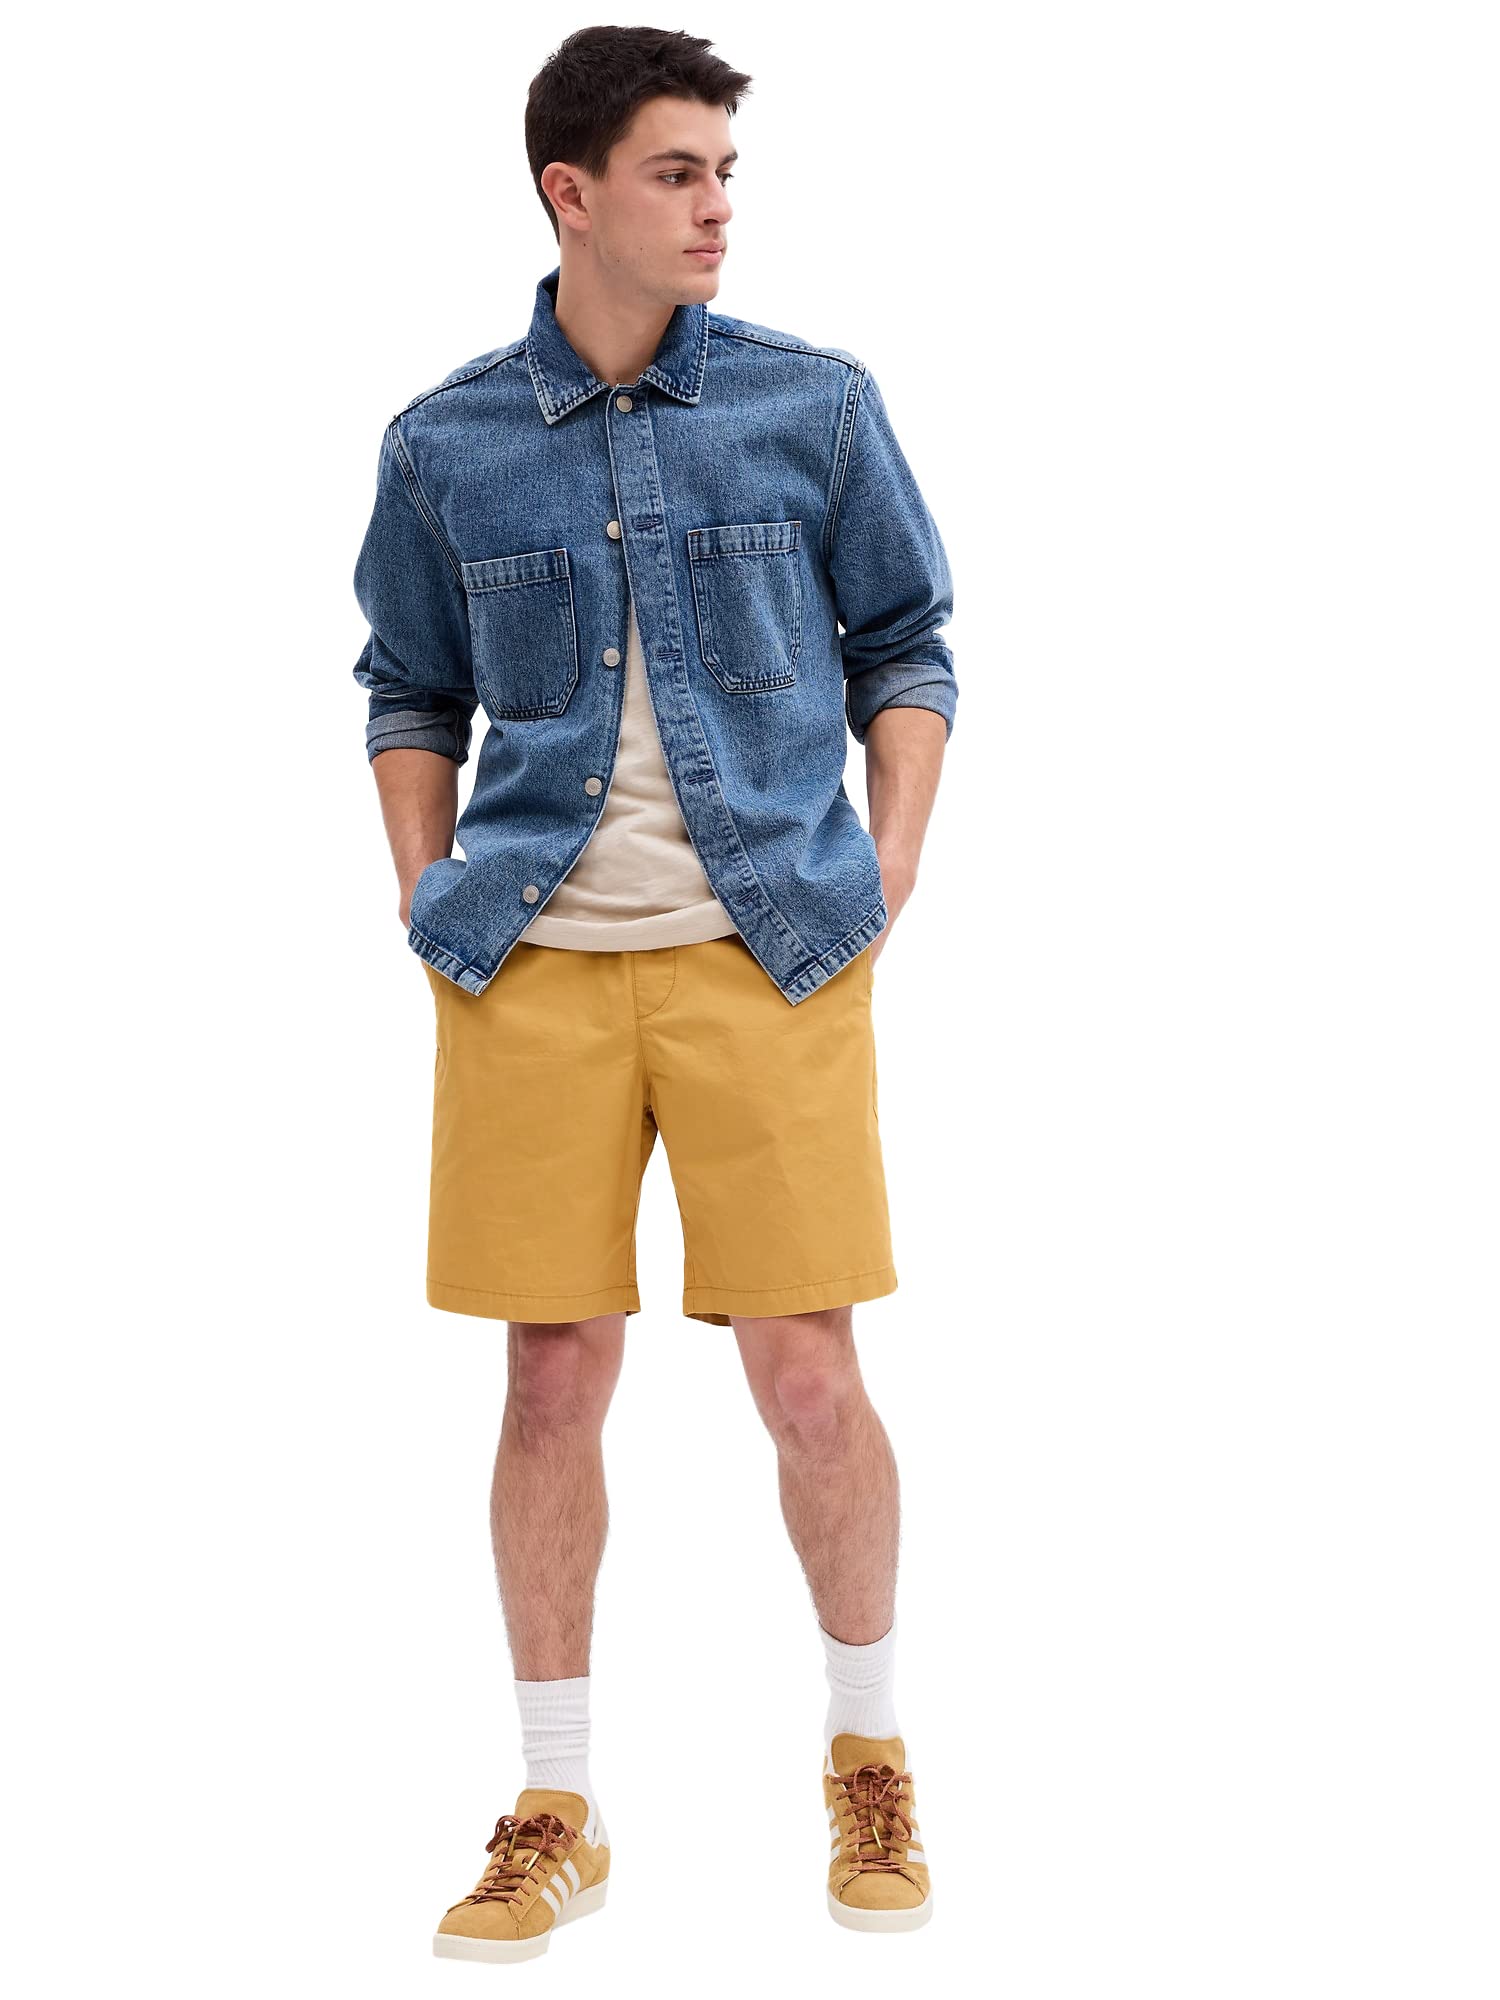 GAP Men's 8" 100% Cotton Easy Shorts (Honey IM Home, Size: S-XL) from $9.86 + Free Shipping w/ Prime or on $35+